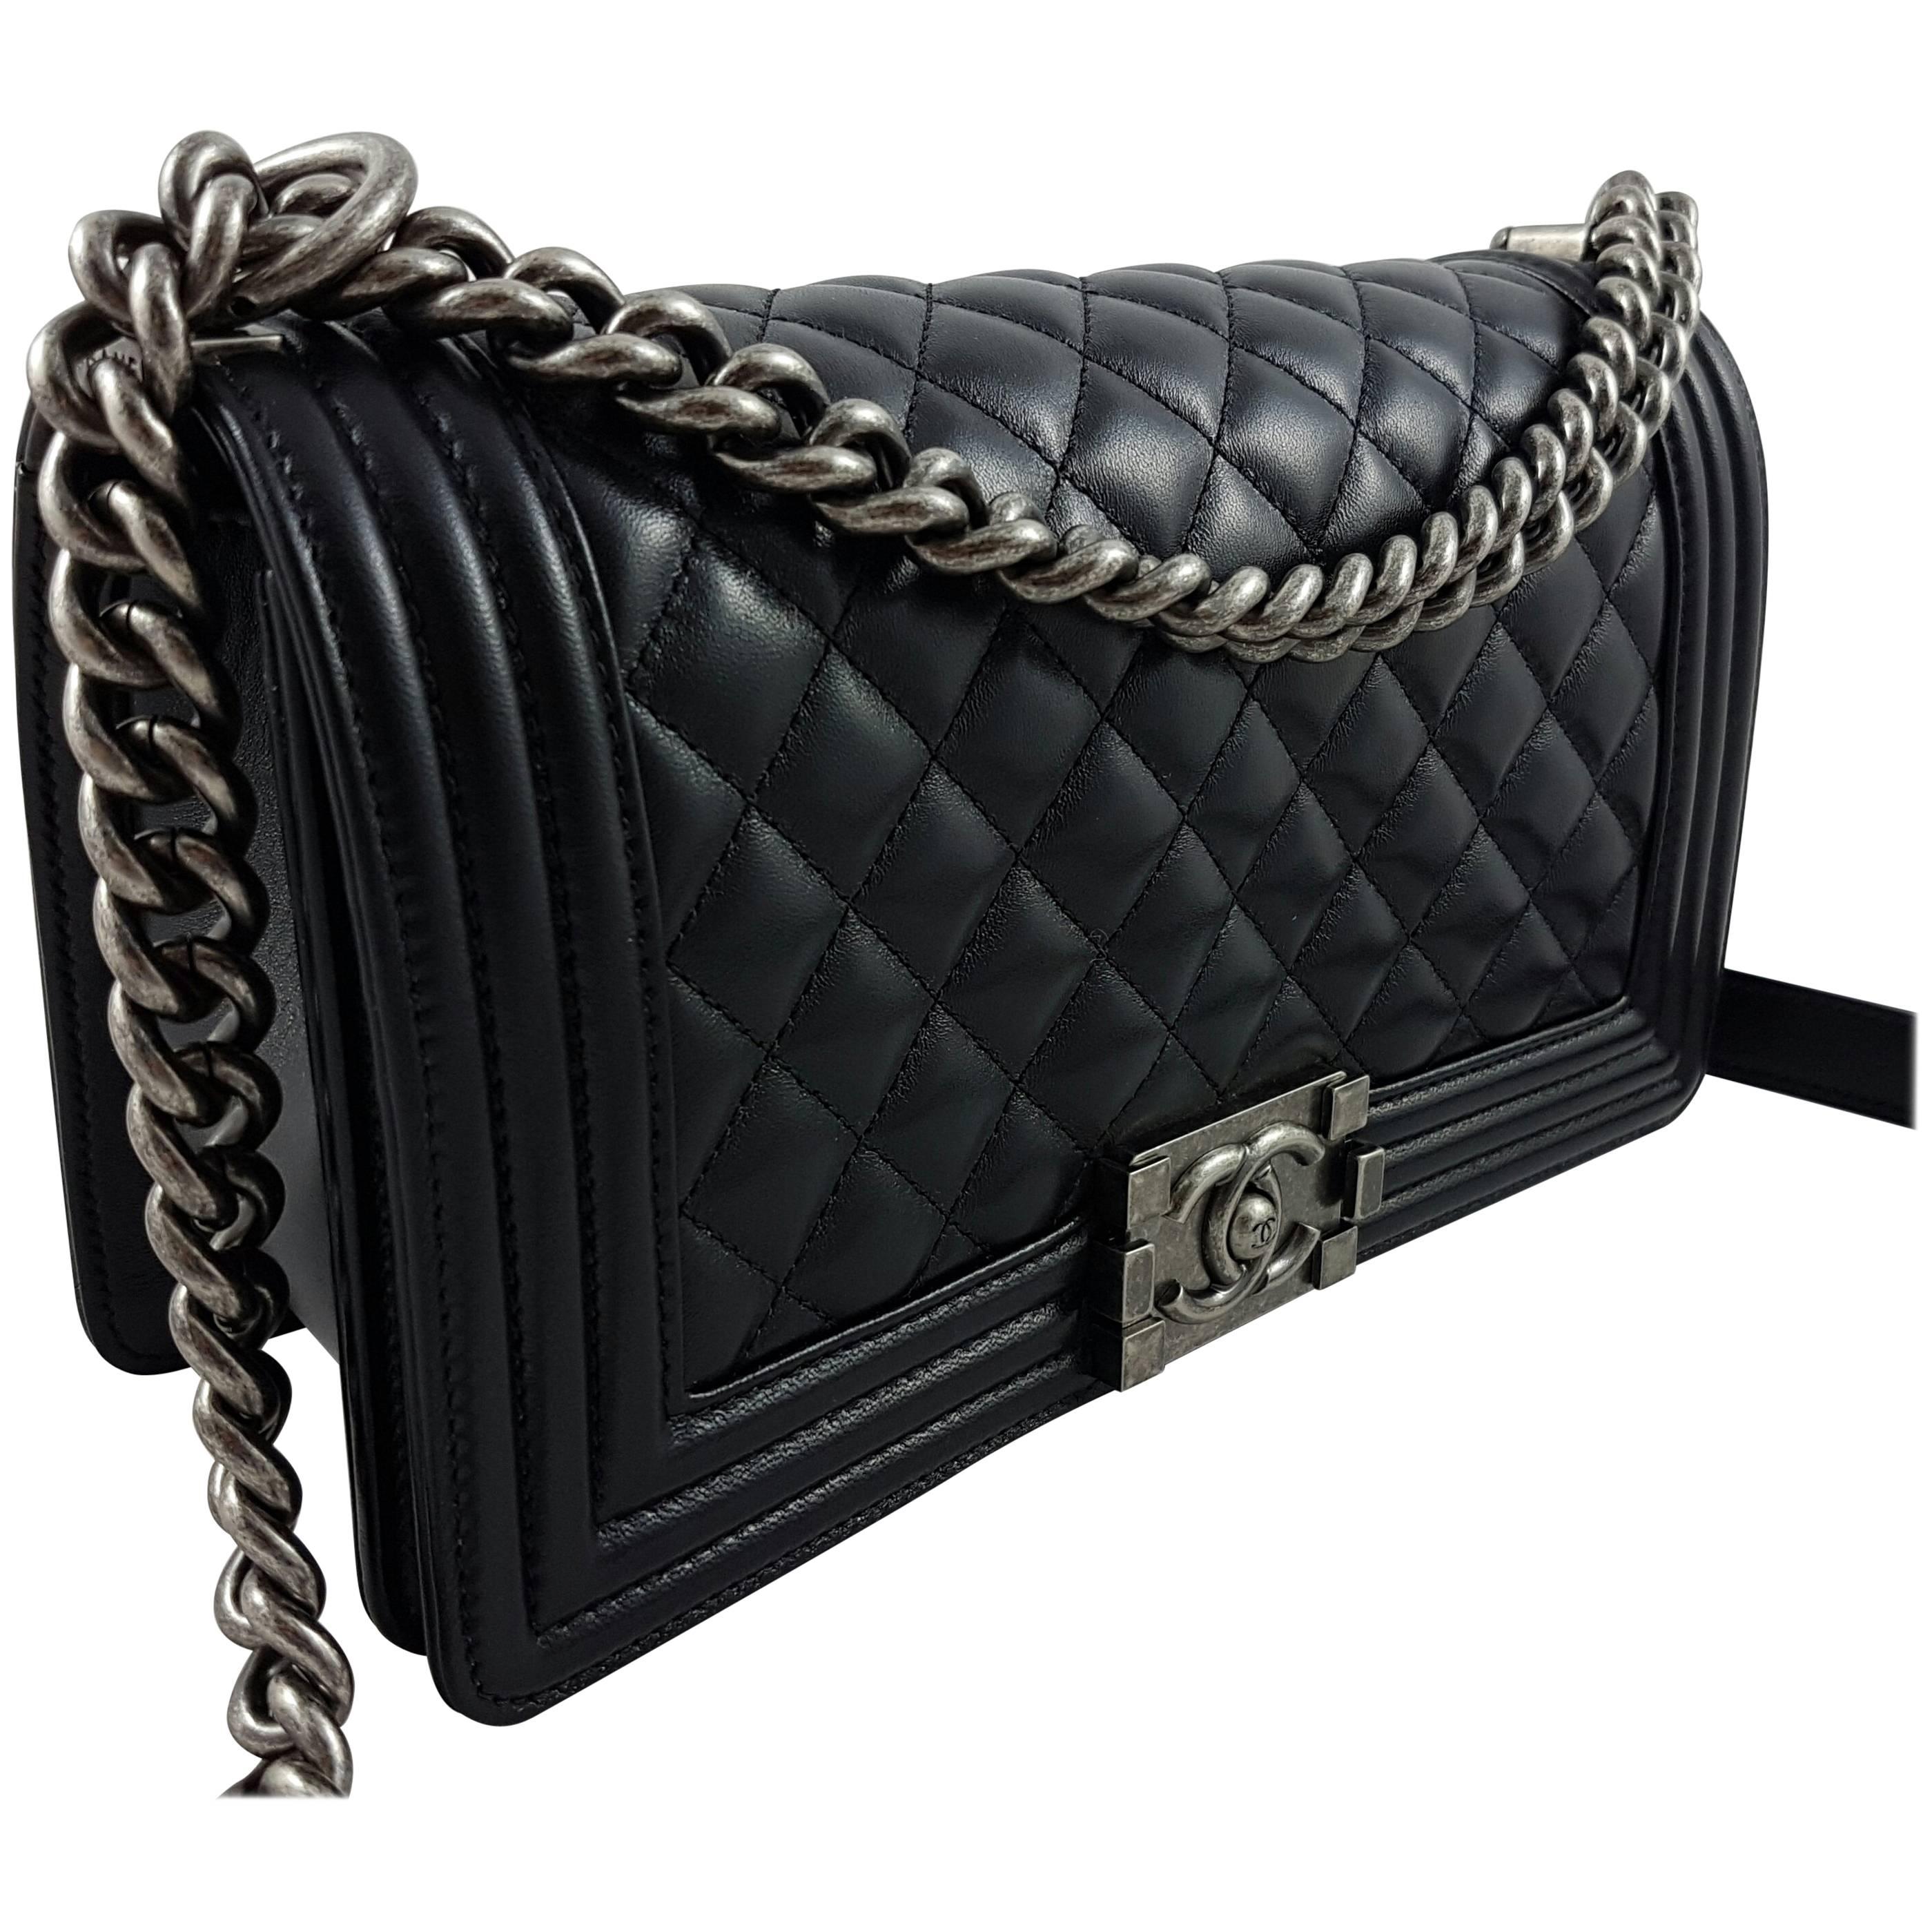 Chanel Medium Boy Bag Quilted Leather Black with Silver Hardware